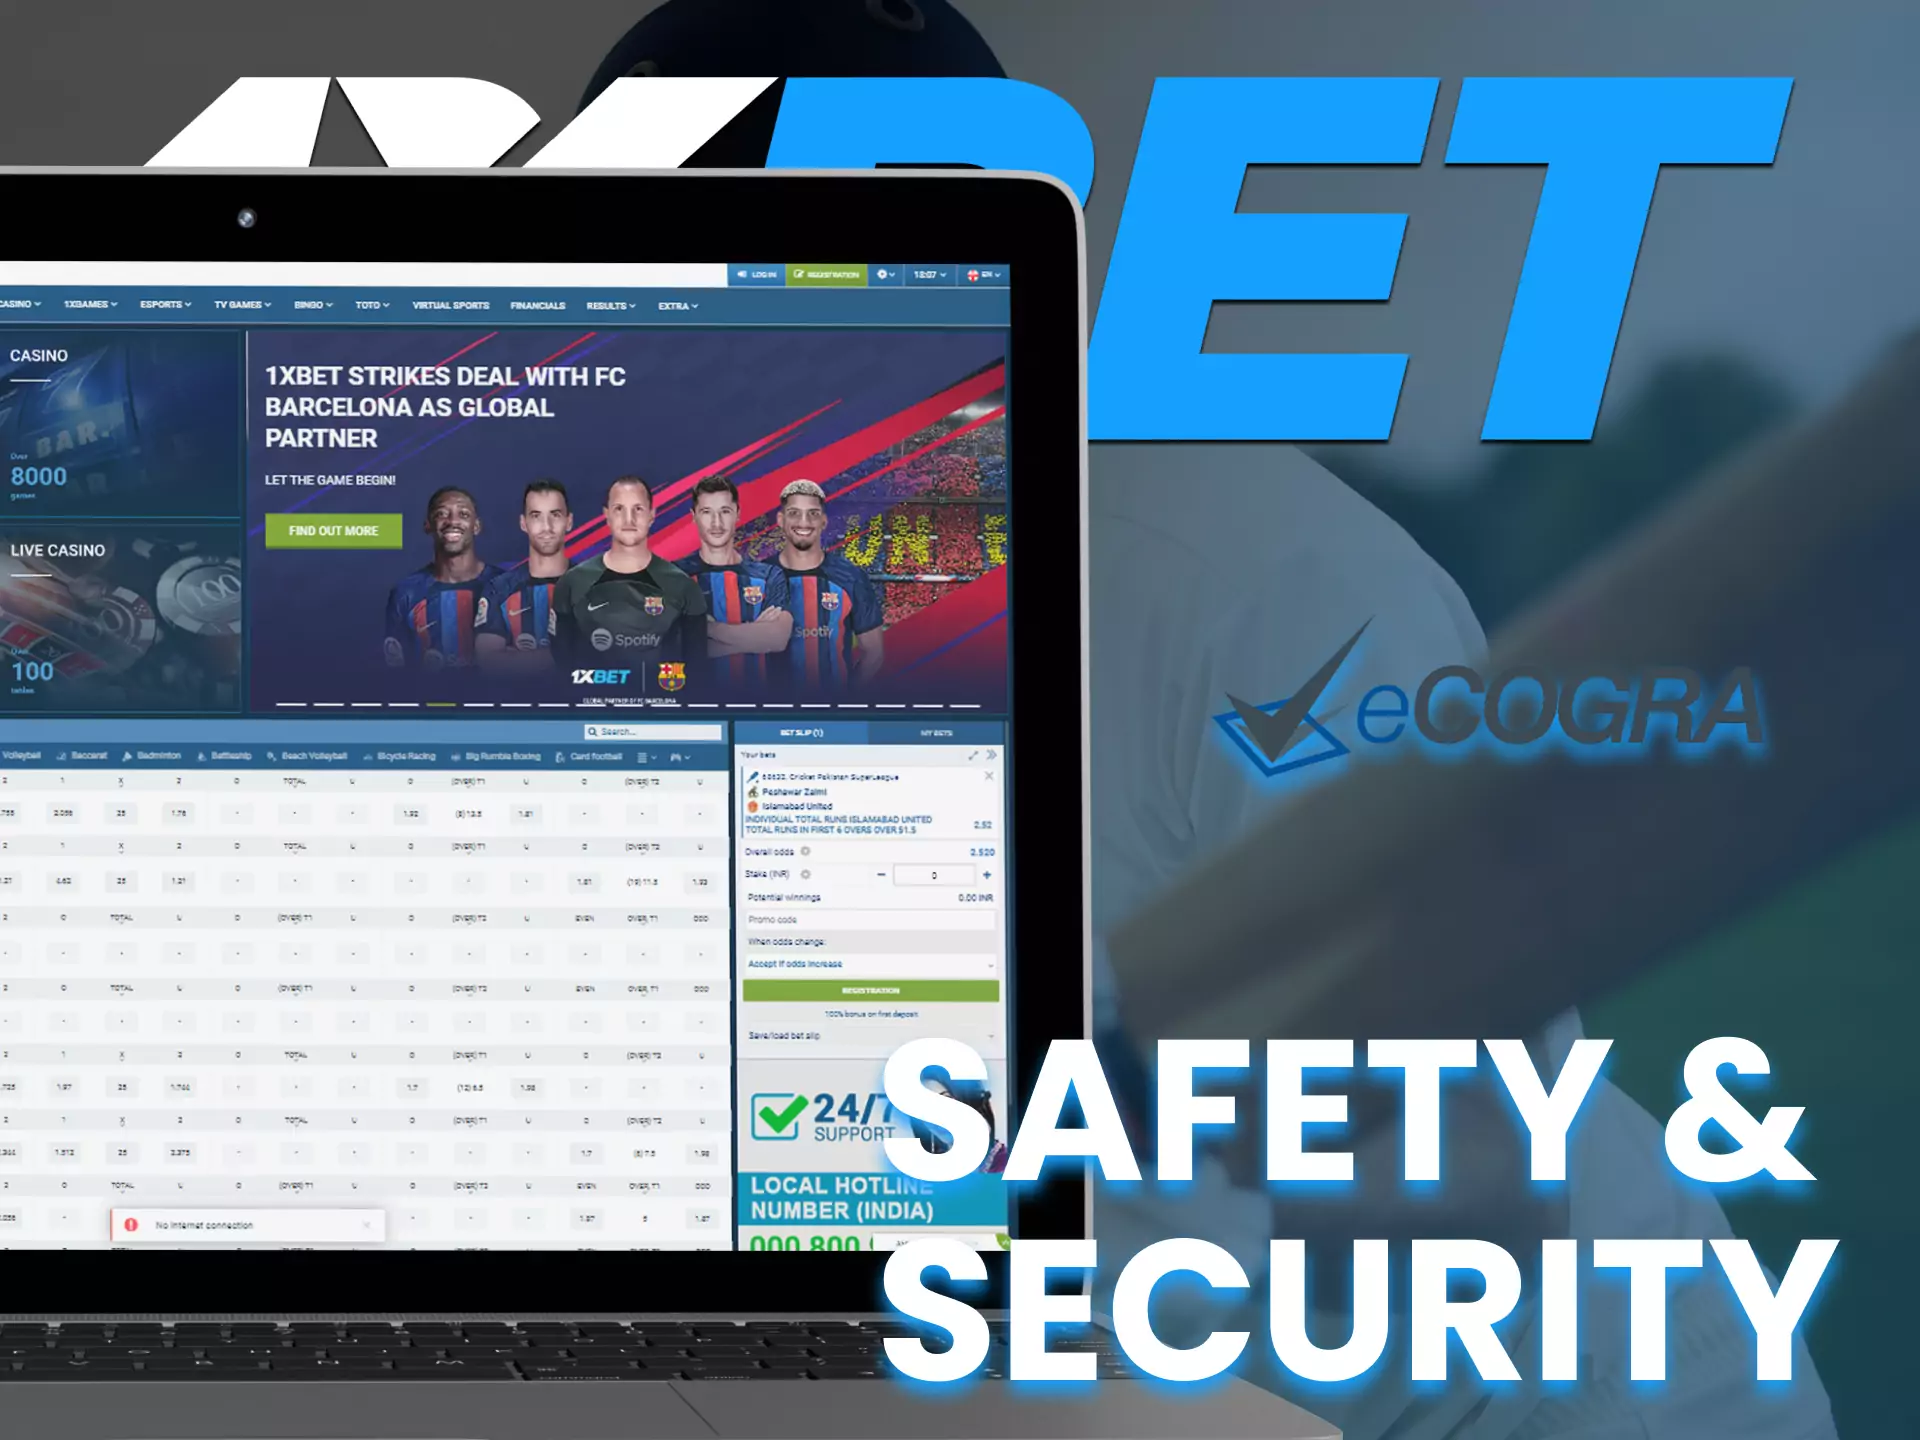 1XBET is safe for players, all your data will be secured.